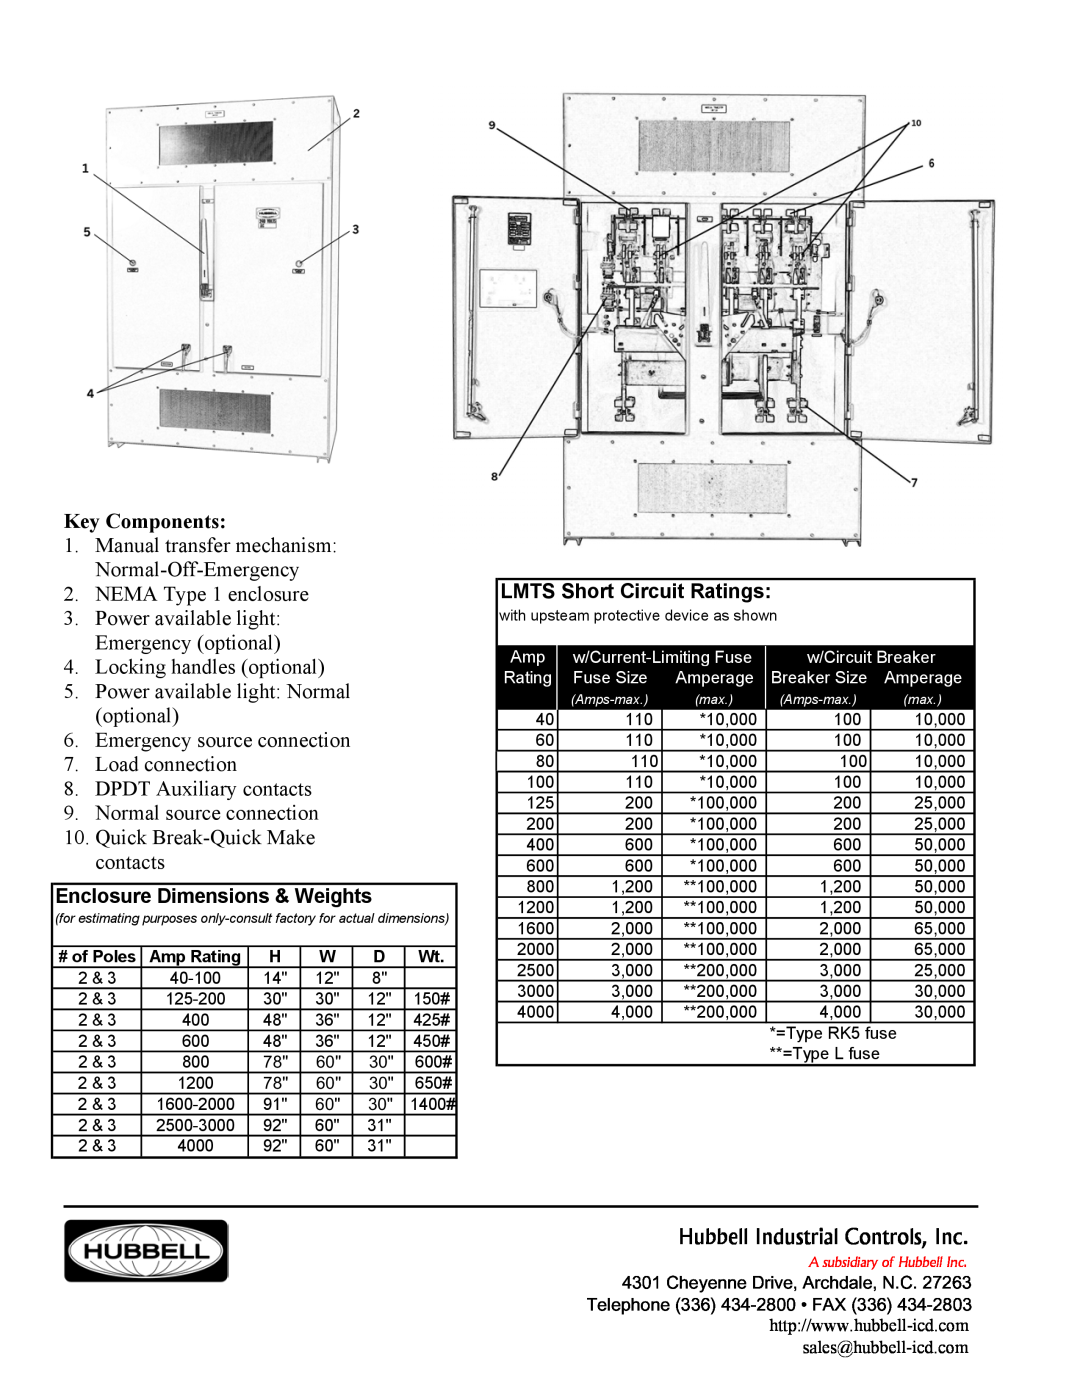 Hubbell Key Components, Hubbell Industrial Controls, Inc, Enclosure Dimensions & Weights, LMTS Short Circuit Ratings 